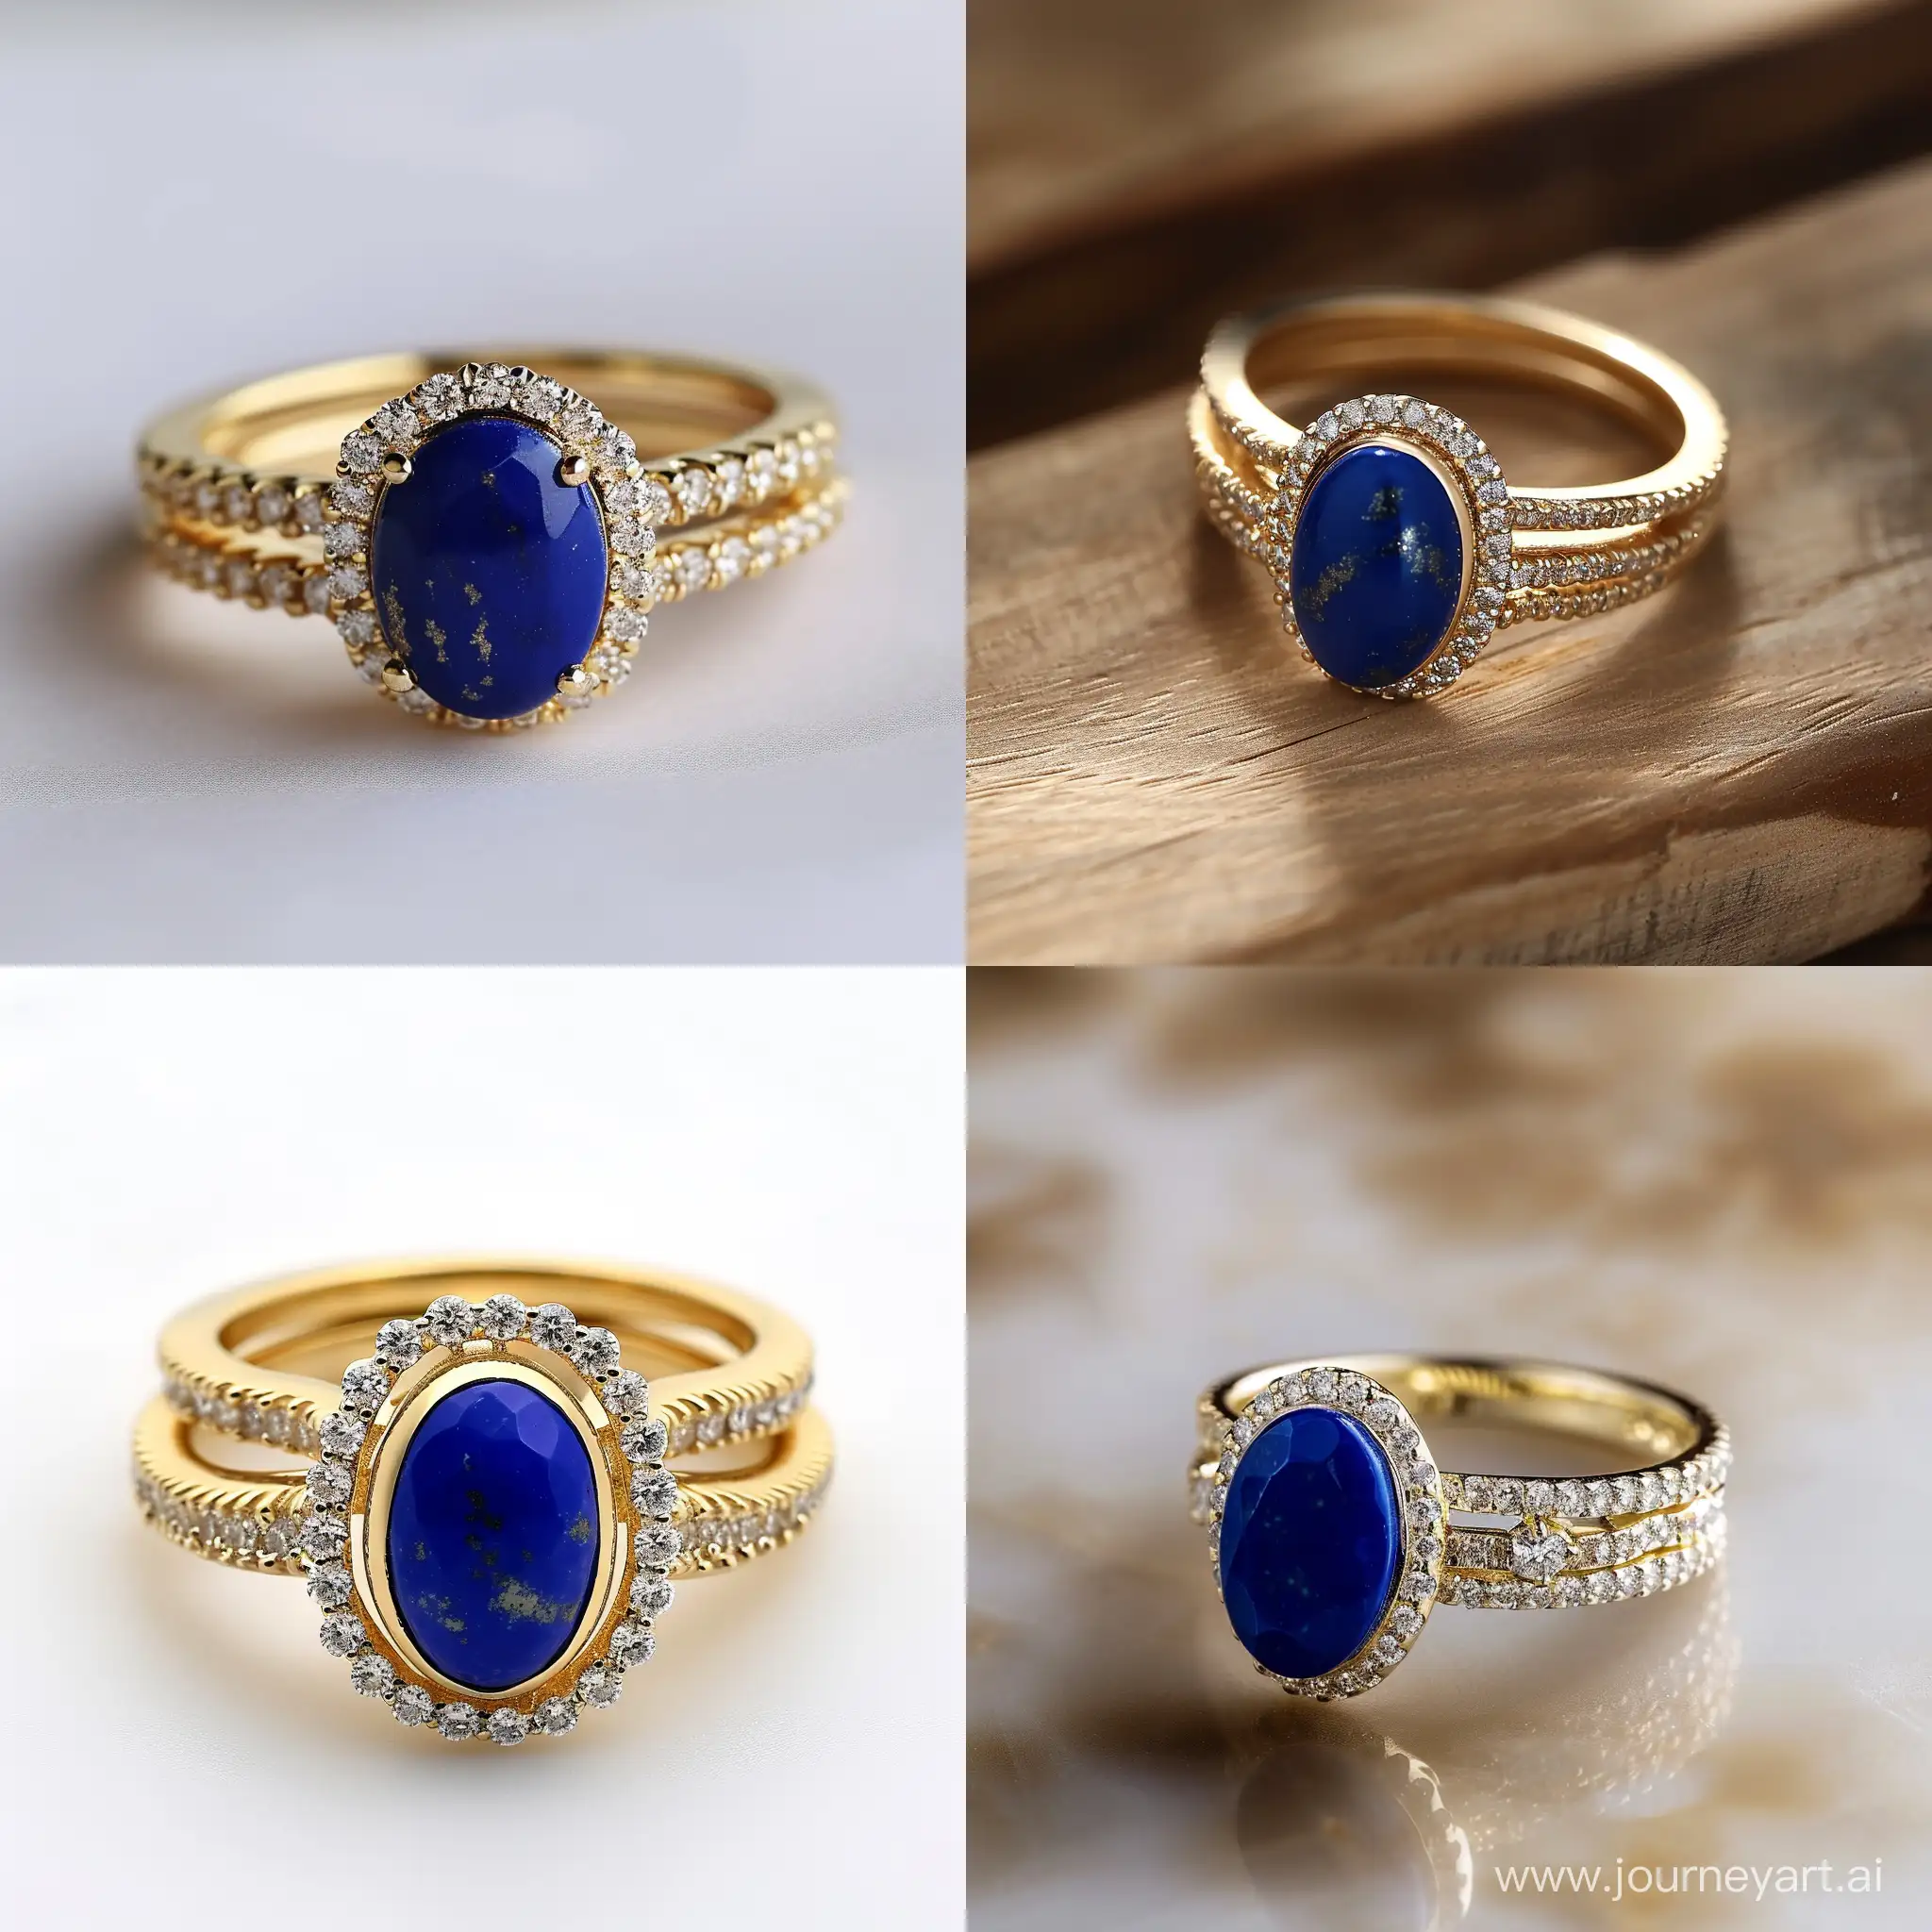 /imagine prompt gold ring with ovale cut lapis lazuli 2cm long and 1.5 cm wide and diamonds around it vintage style set